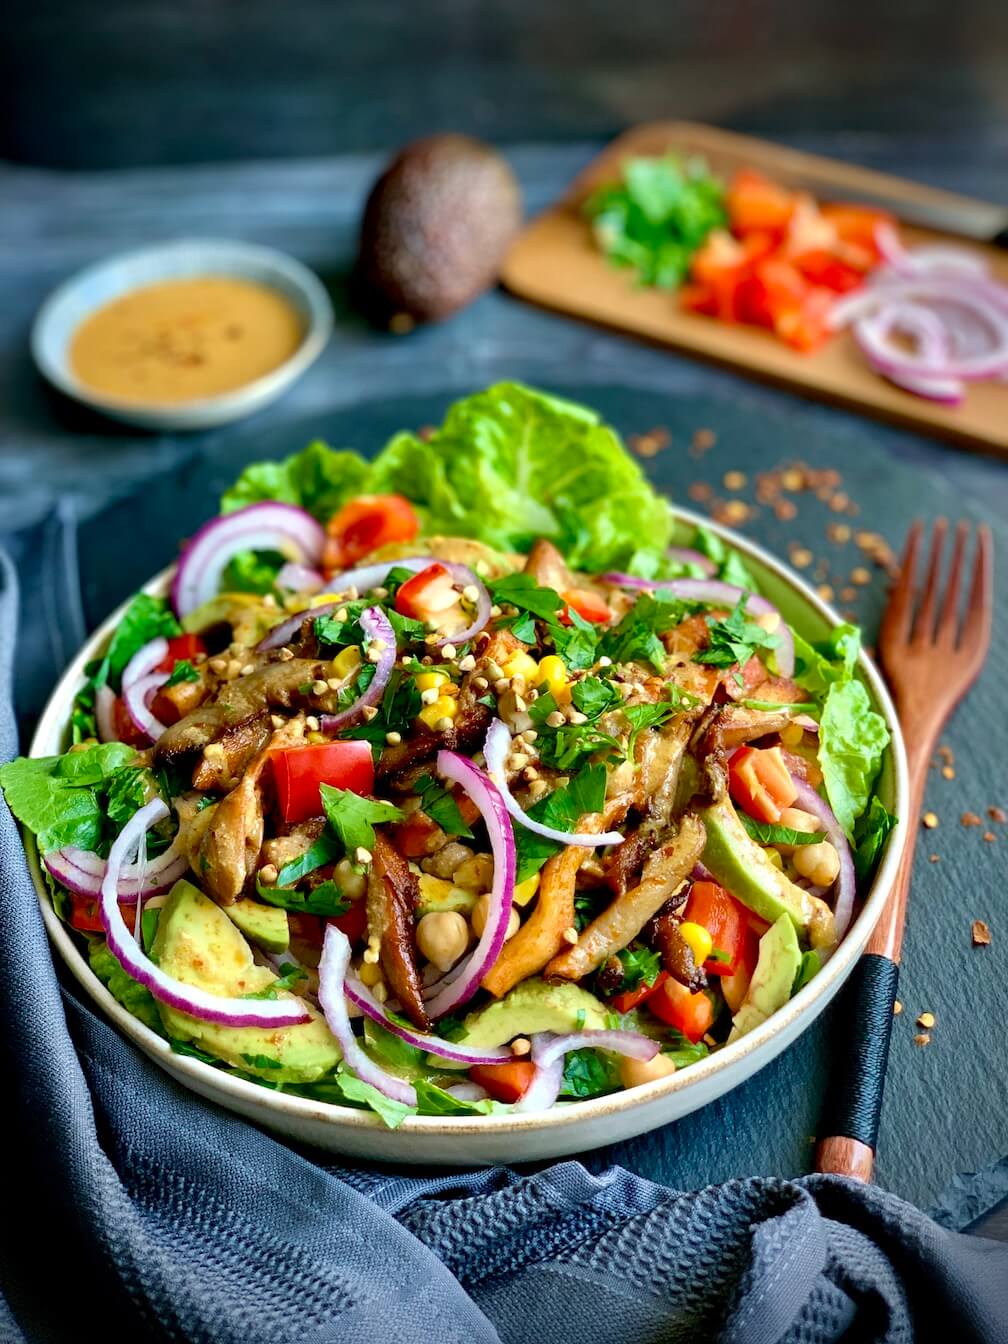 Supercharged Salad with Oyster Mushrooms